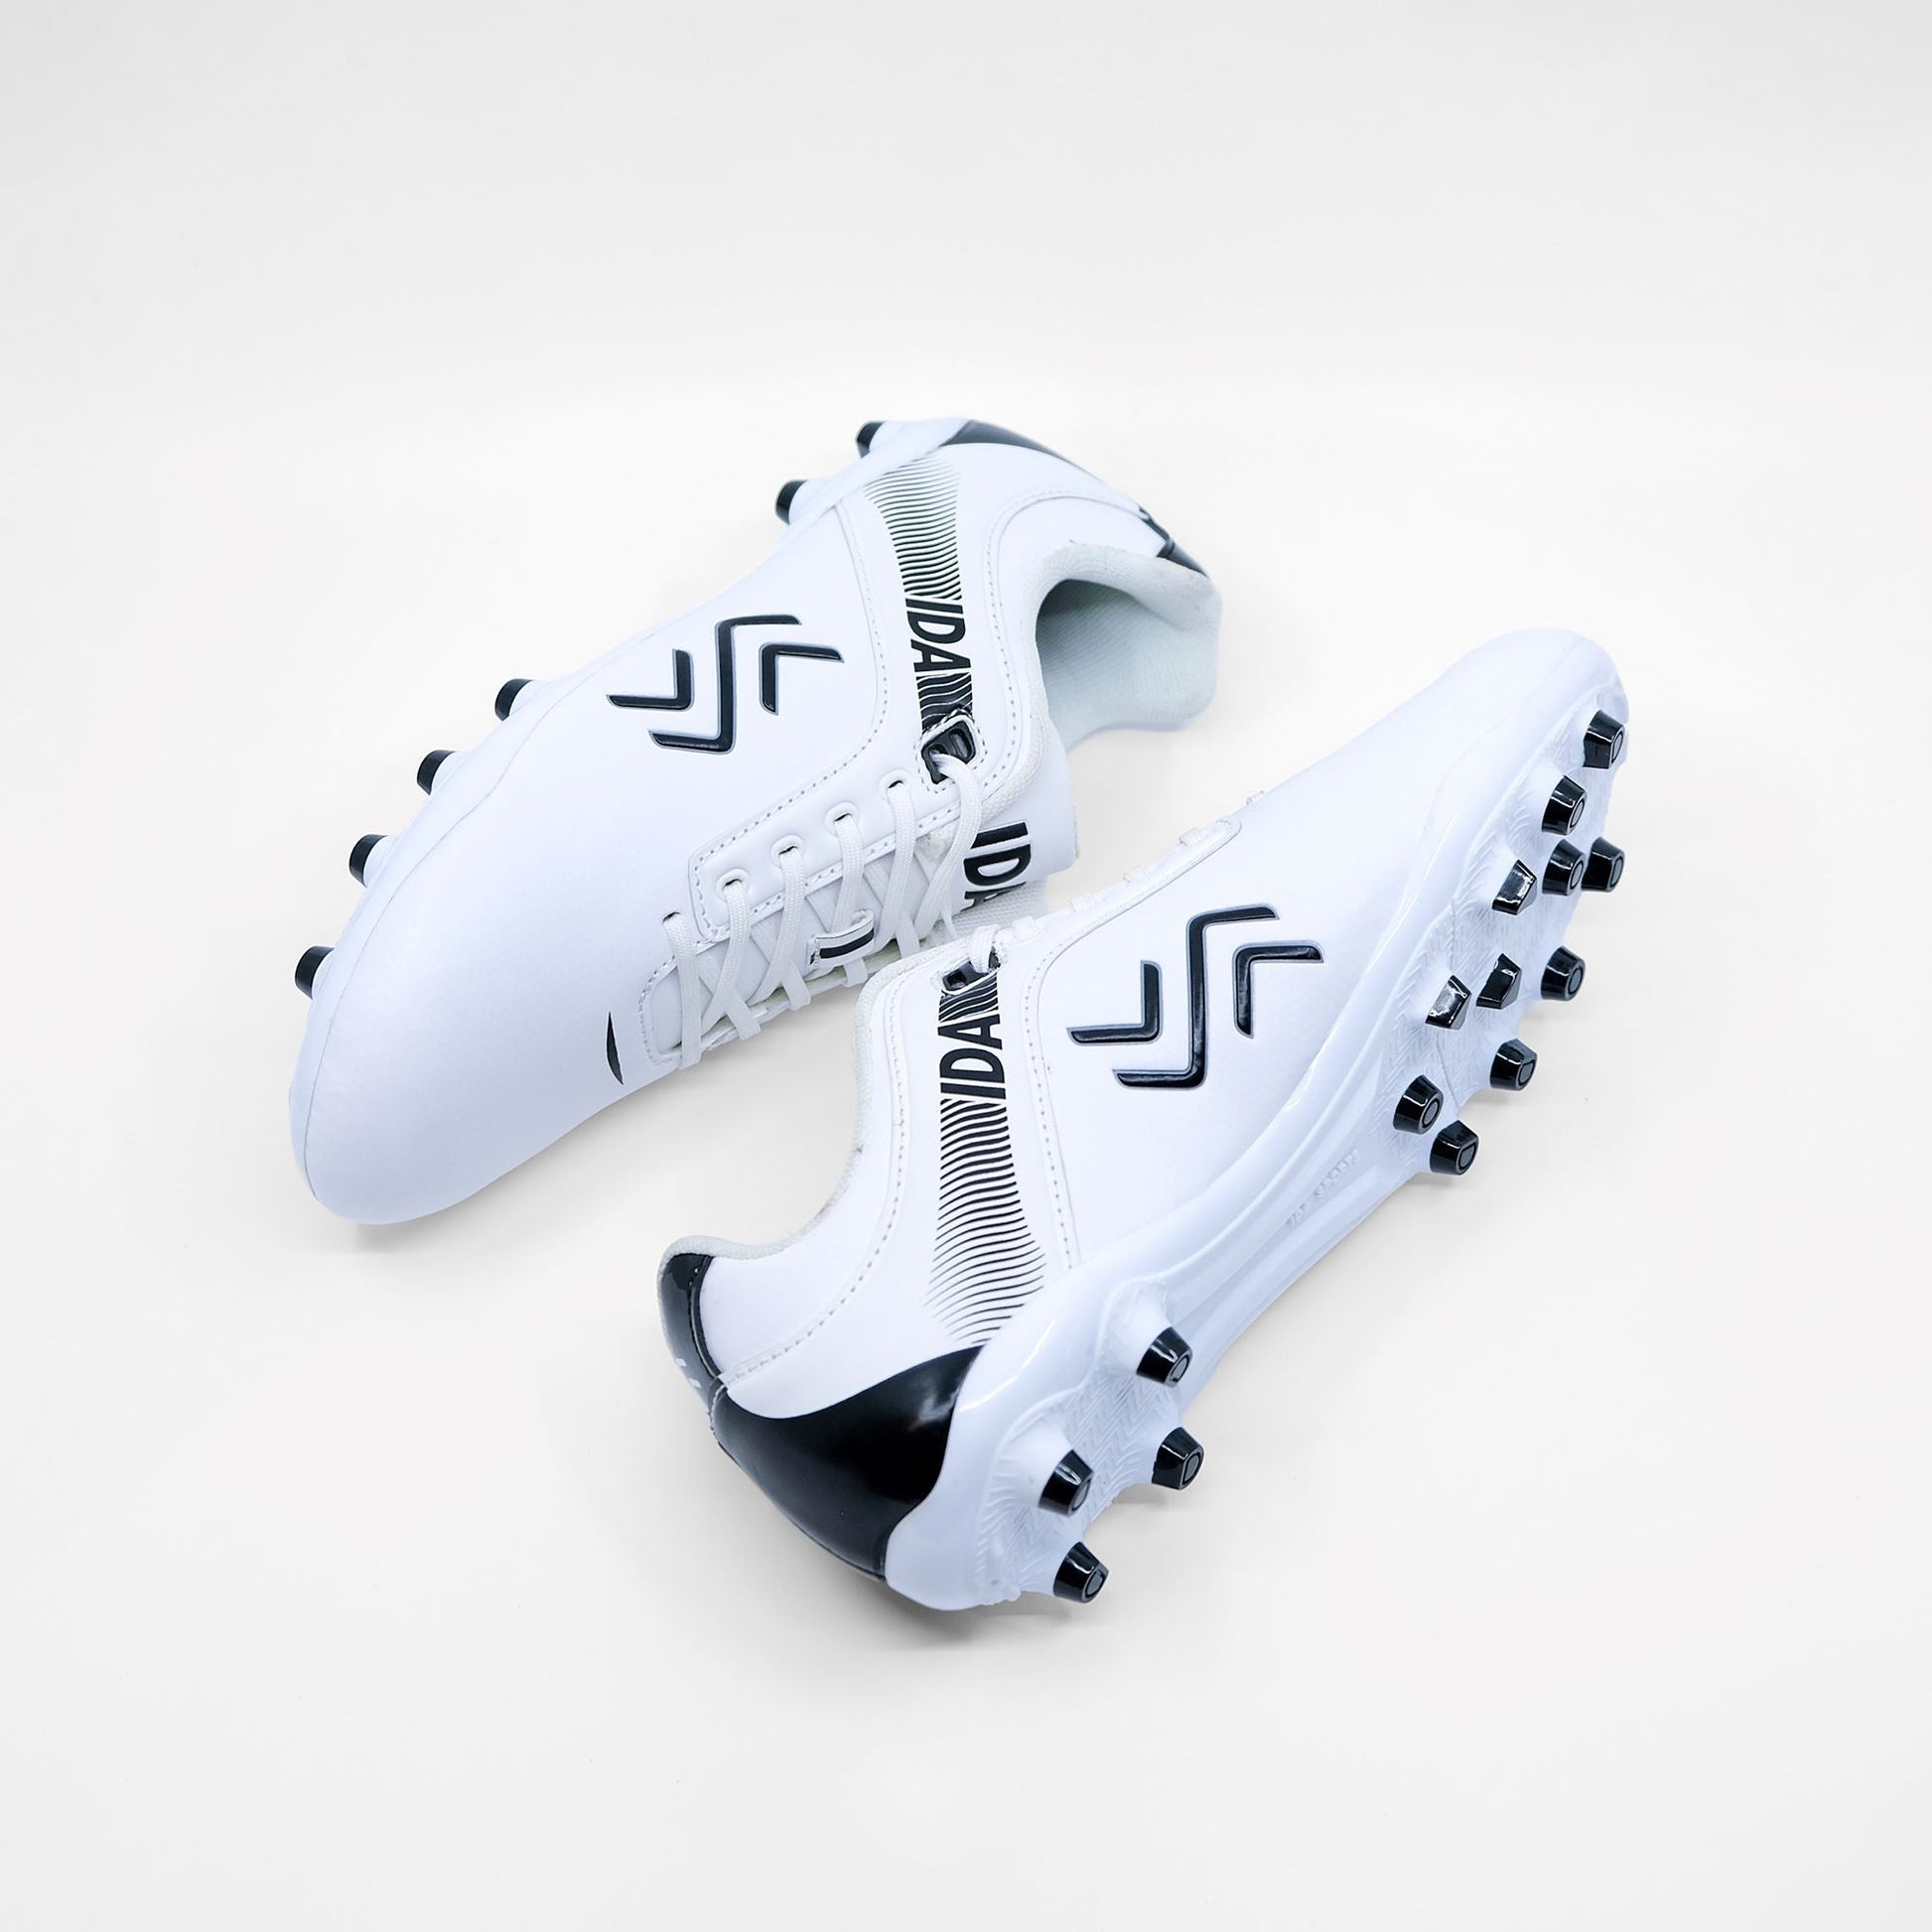 IDA Centra Women's Soccer Cleat, White, FG/AG, Firm Ground, Artificial Ground